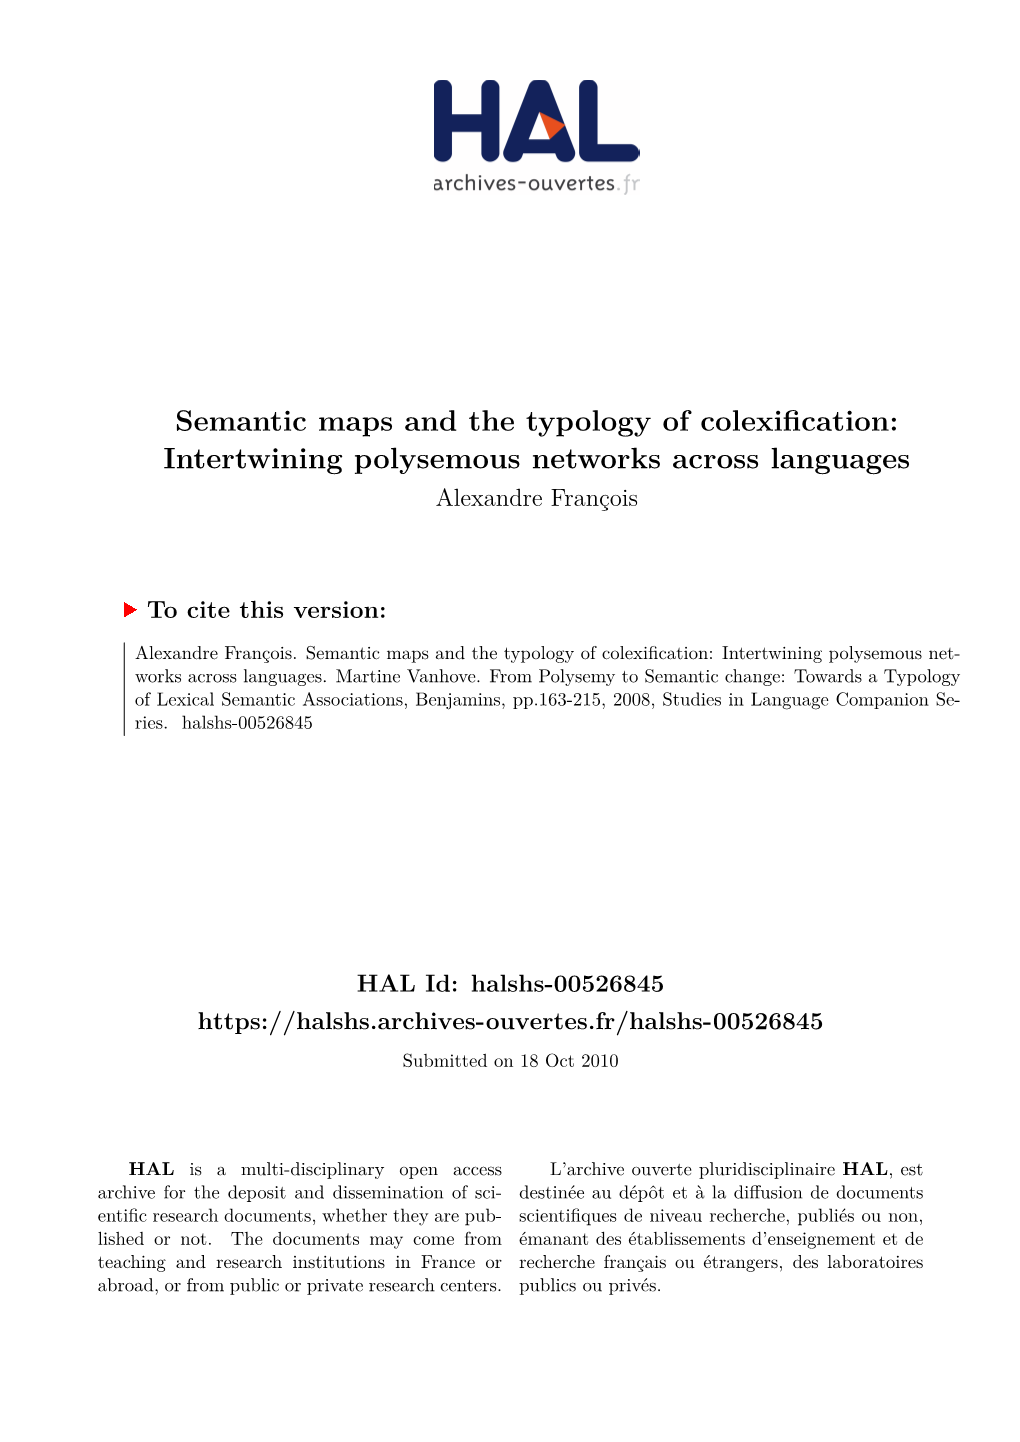 Semantic Maps and the Typology of Colexification: Intertwining Polysemous Networks Across Languages Alexandre François